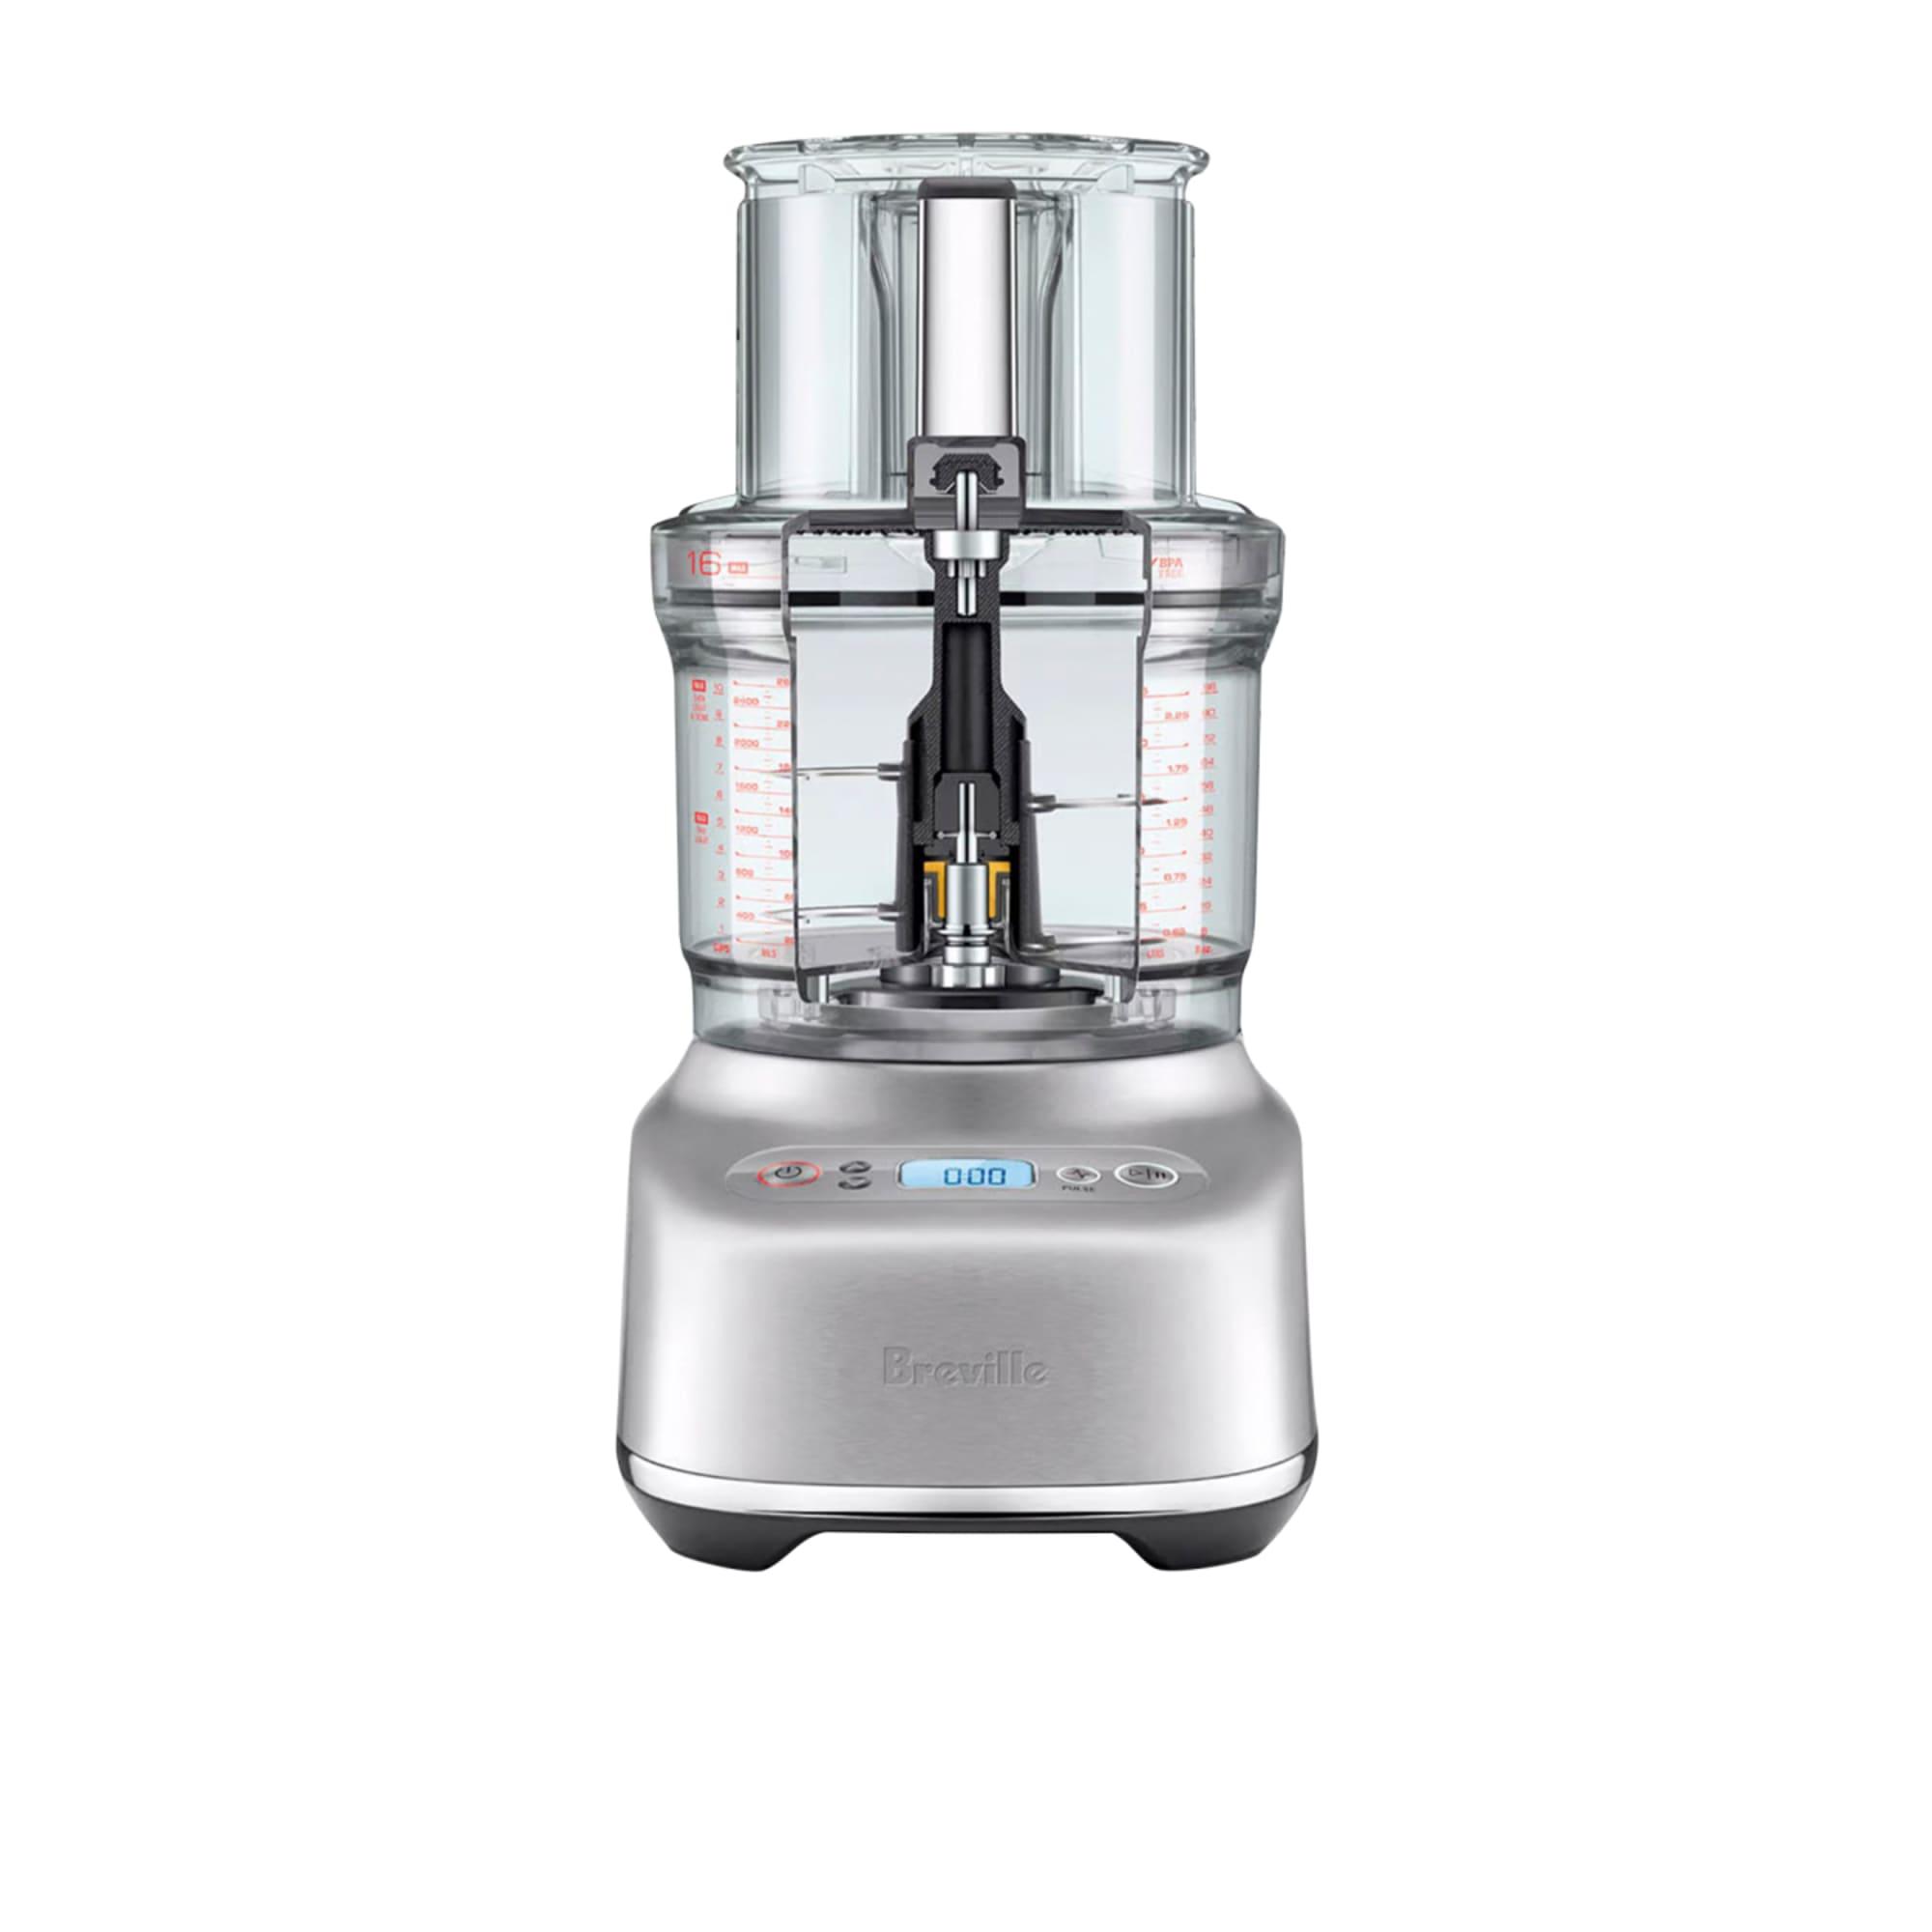 Breville The Paradice Food Processor Image 3